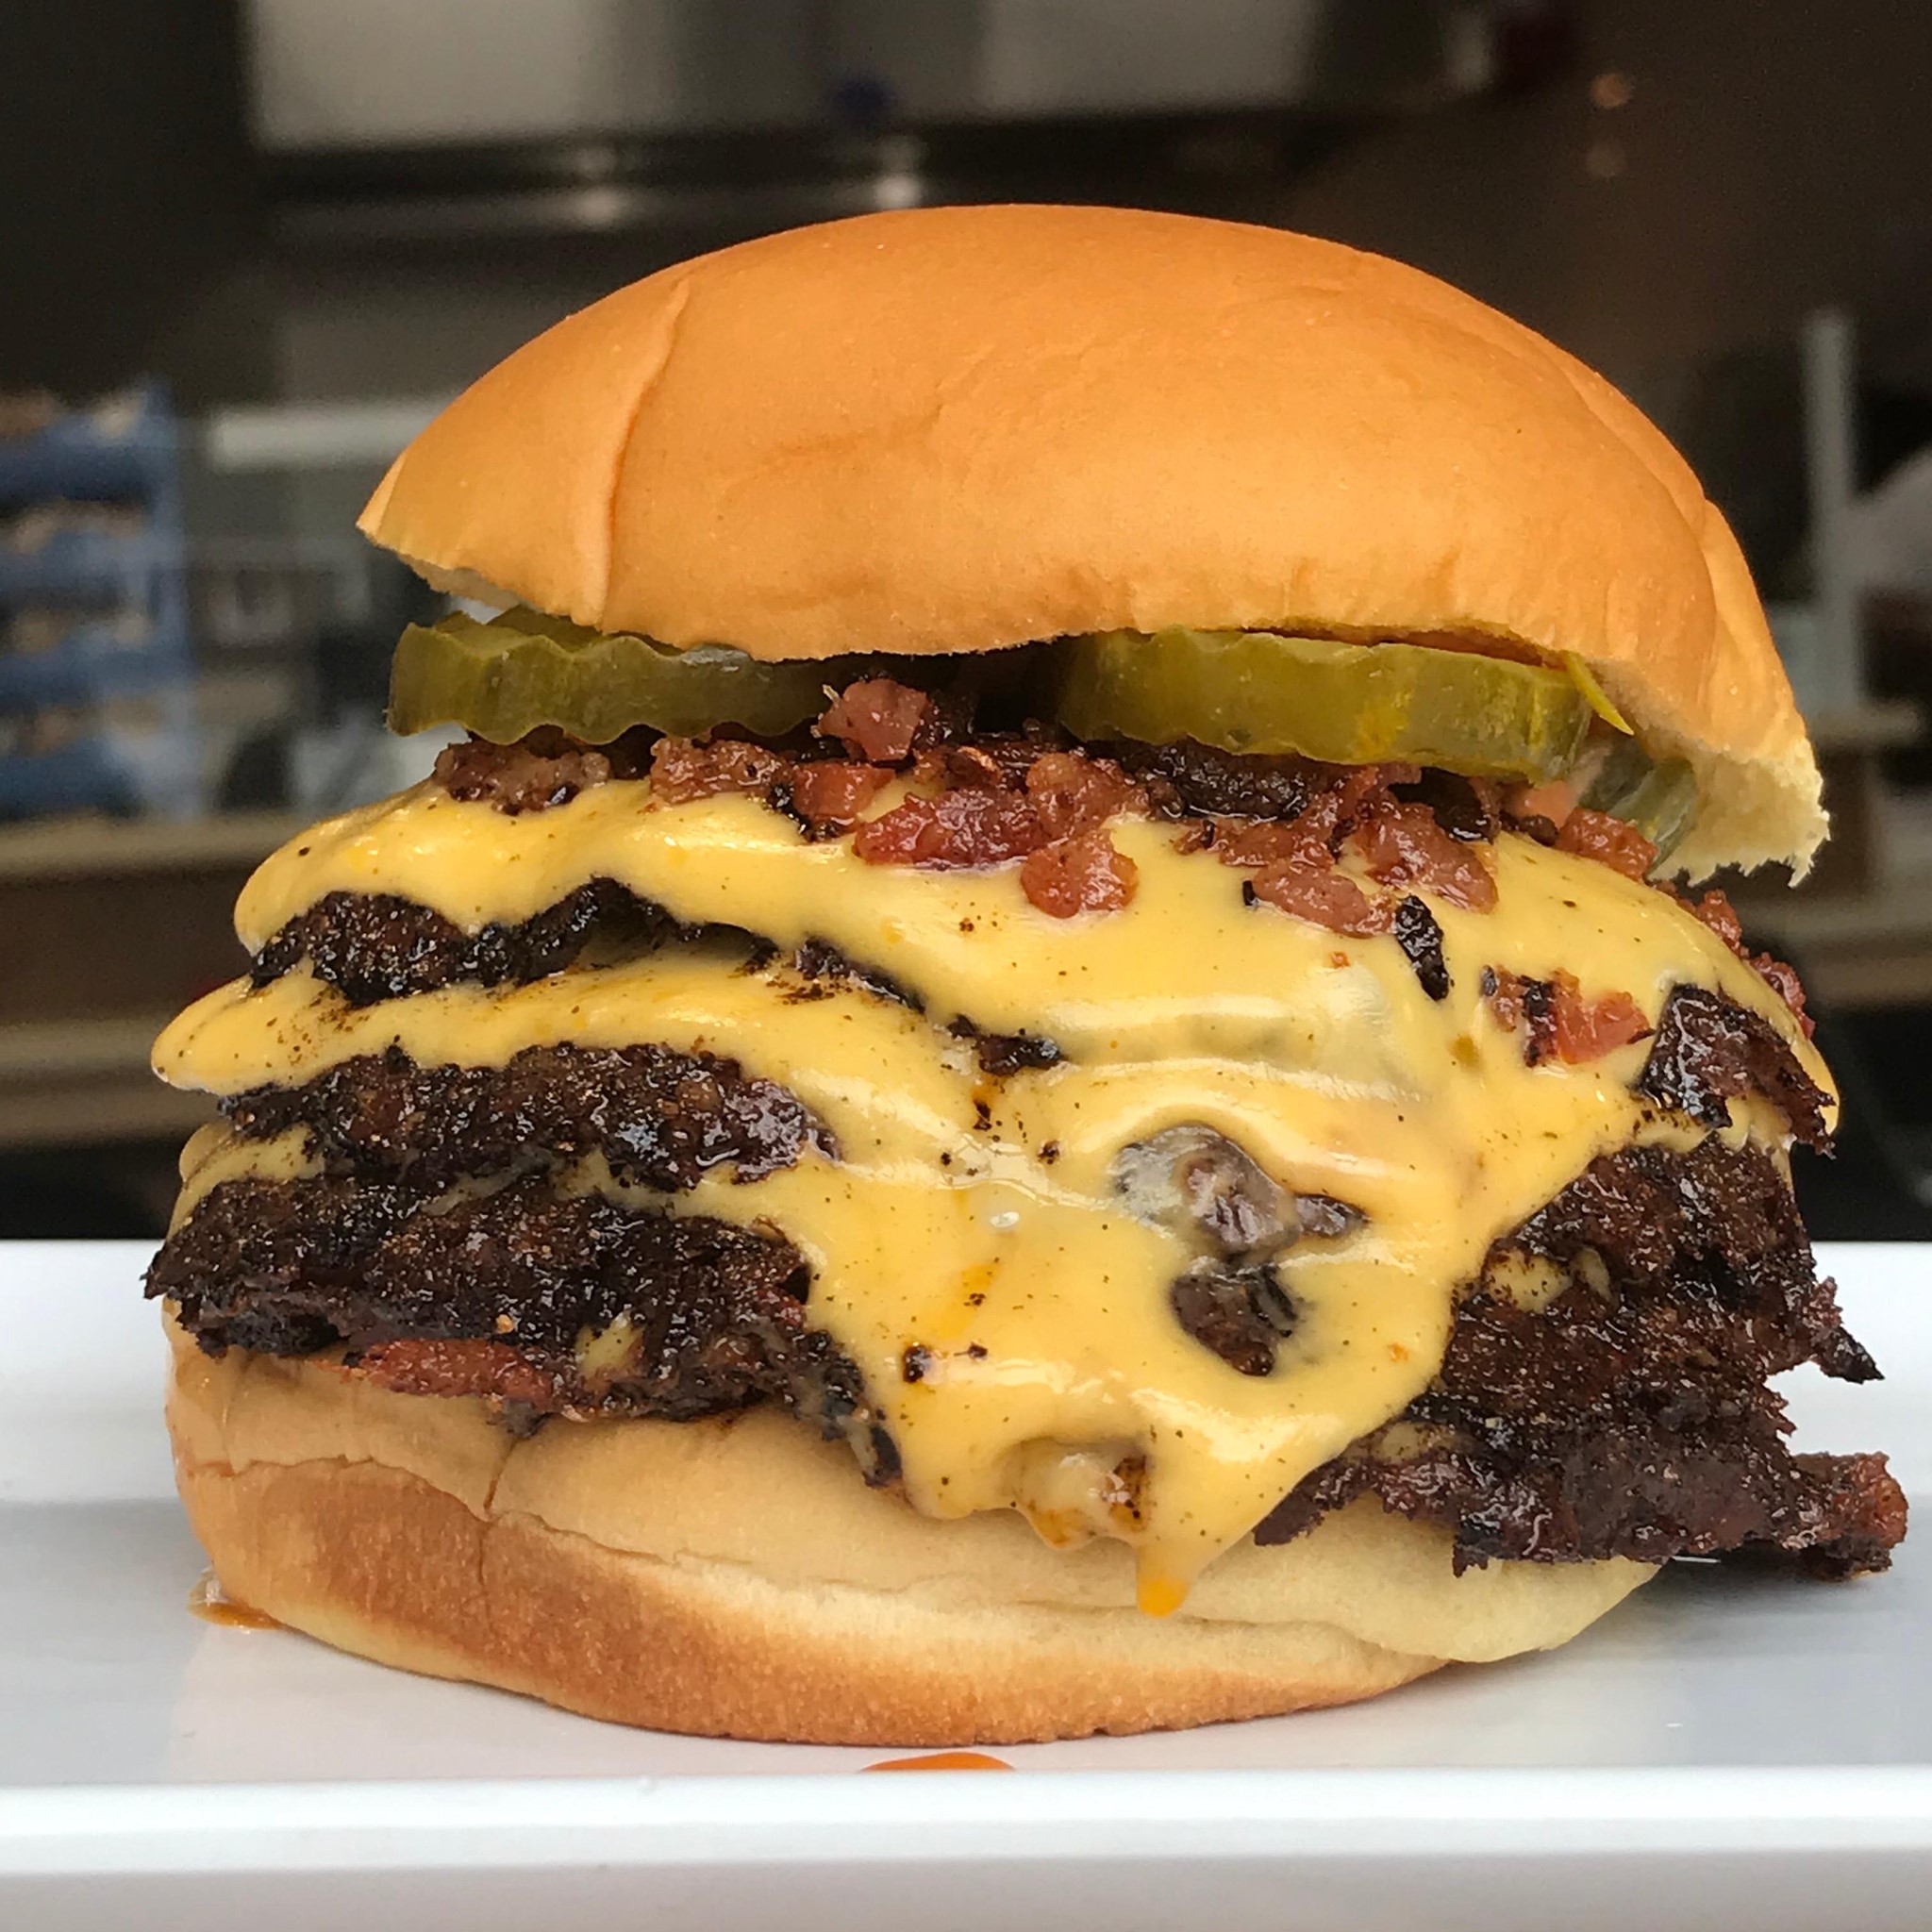 A triple cheese burger with bacon bits and dill pickles